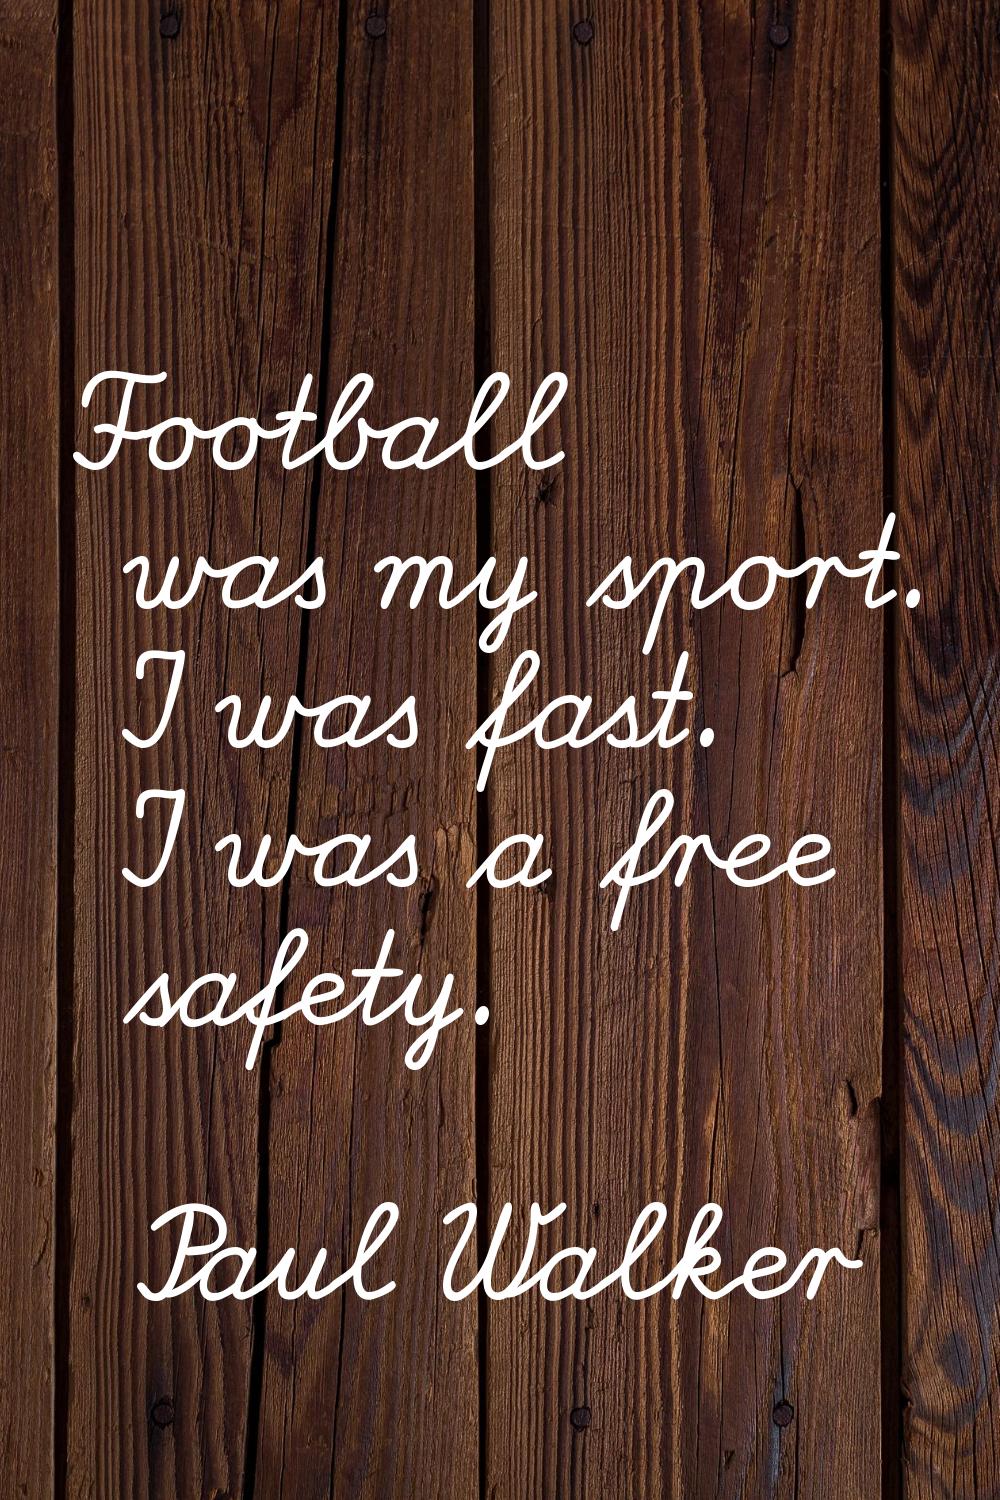 Football was my sport. I was fast. I was a free safety.